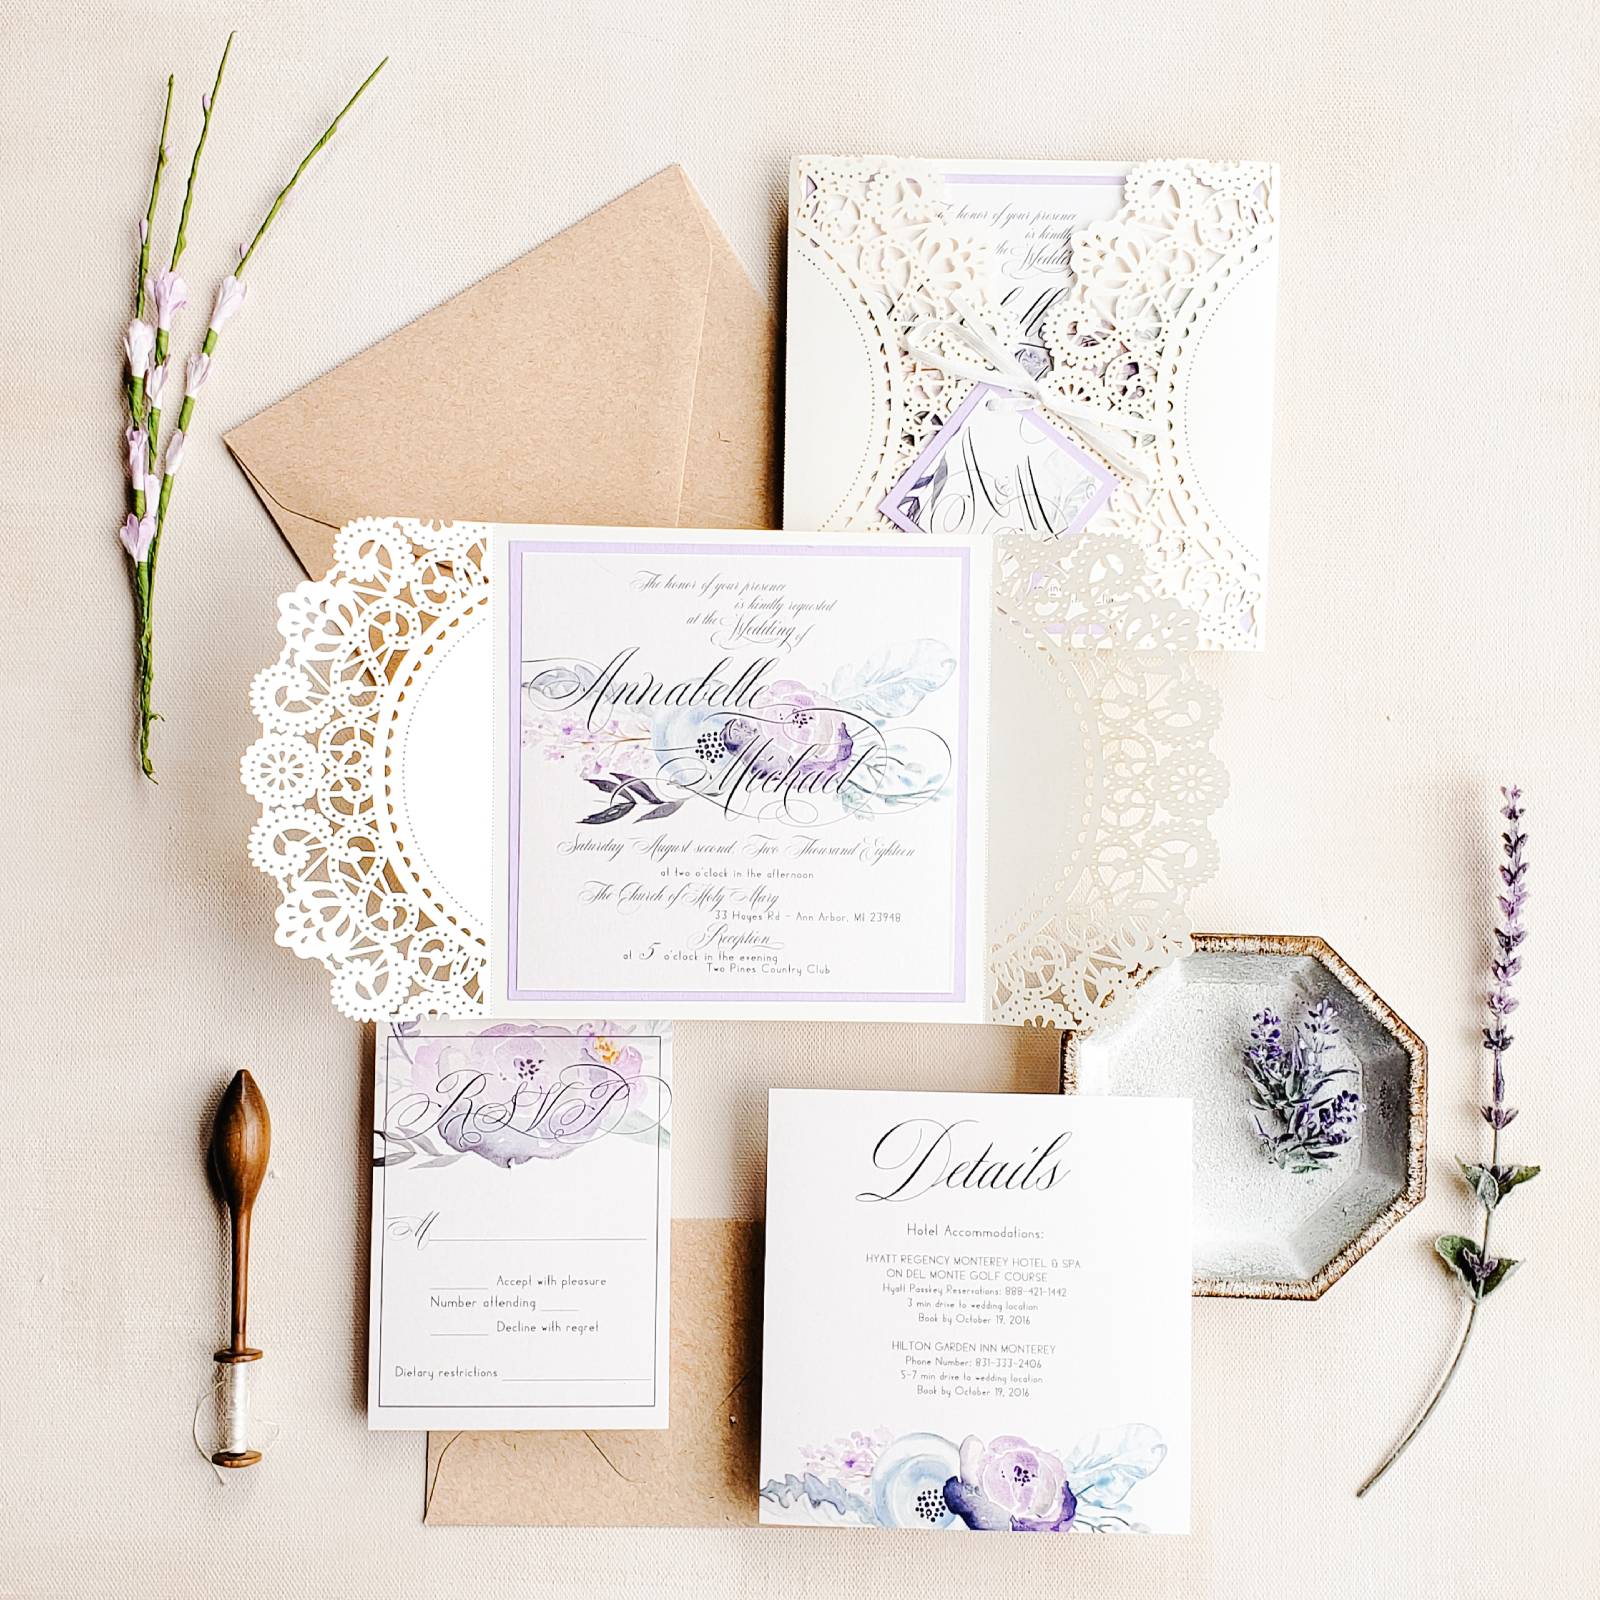 [vc_row][vc_column][vc_column_text]Purchase this listing to get a sample of our Lavender wedding invitation suite.

The sample includes:

• 5.9